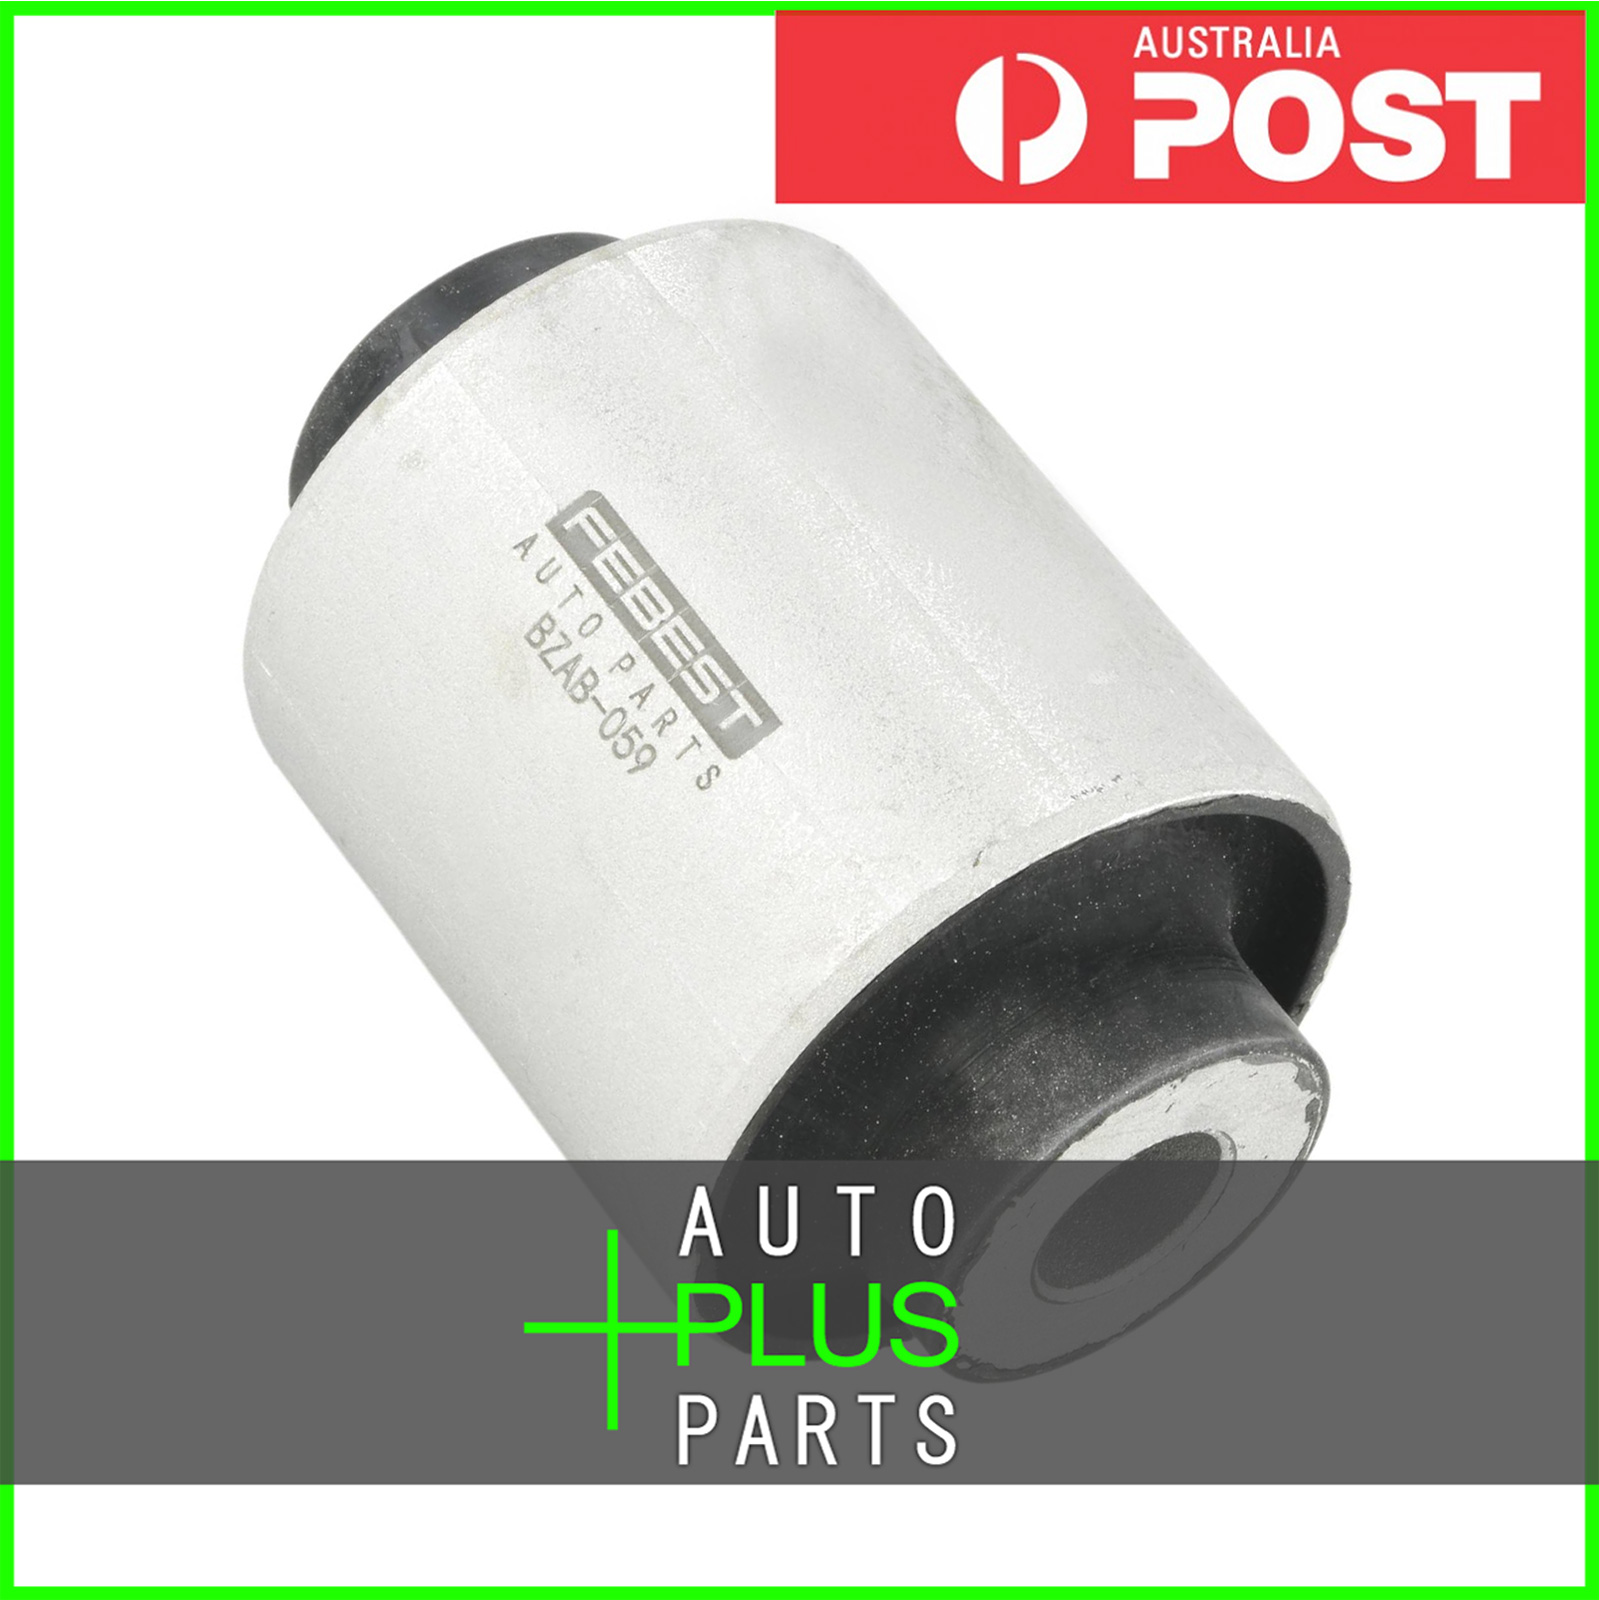 Fits MERCEDES BENZ E 350 4MATIC BLUE EFFICIENCY BUSHING, FRONT LOWER CONTROL ARM Product Photo